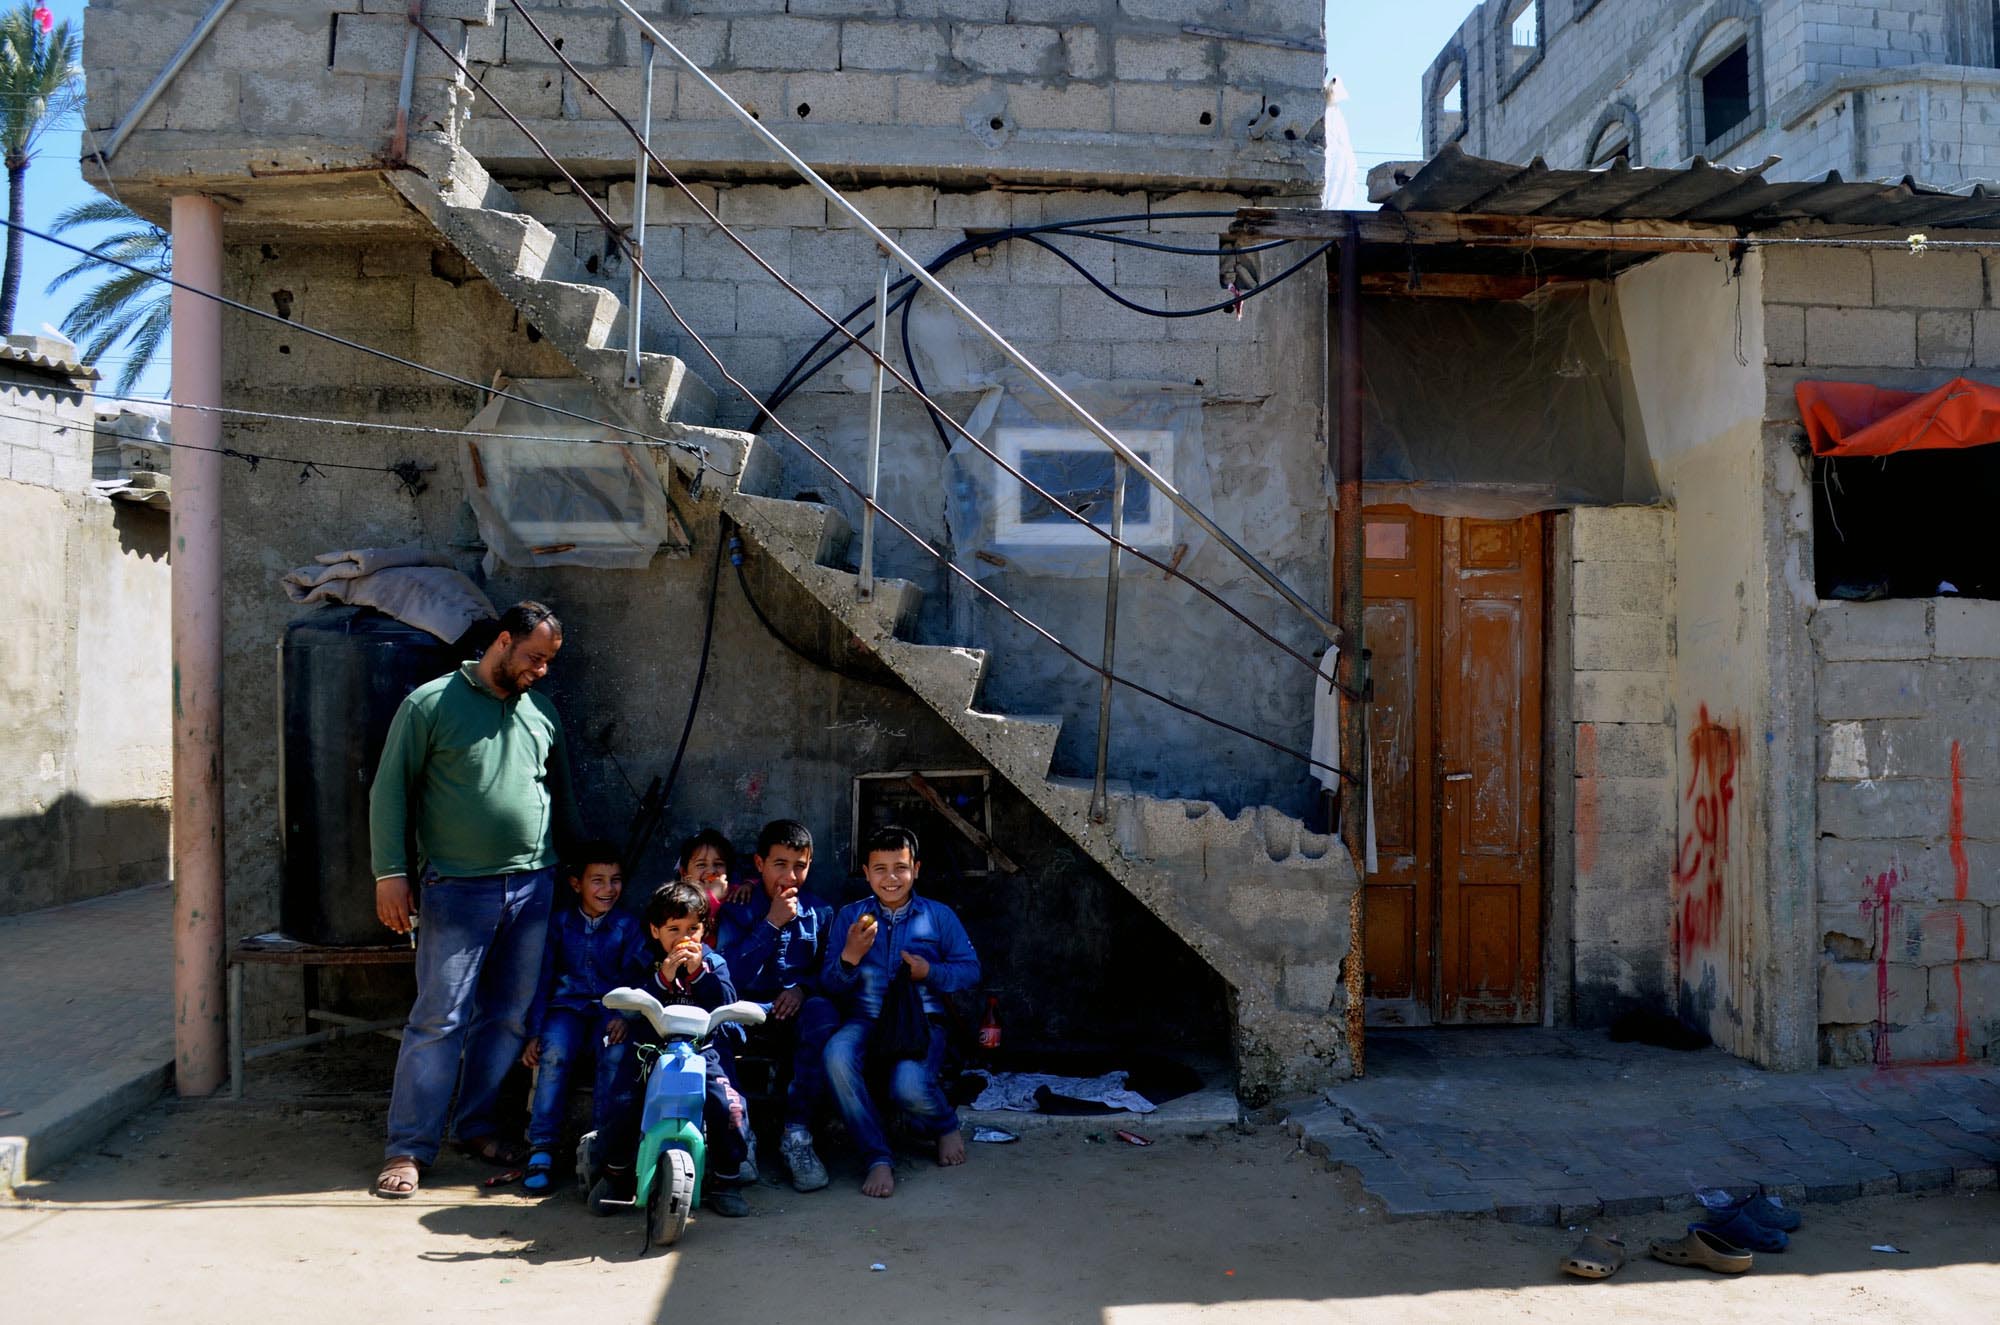 A solar cooker will help Khaled and his family deal with daily power cuts in Gaza.